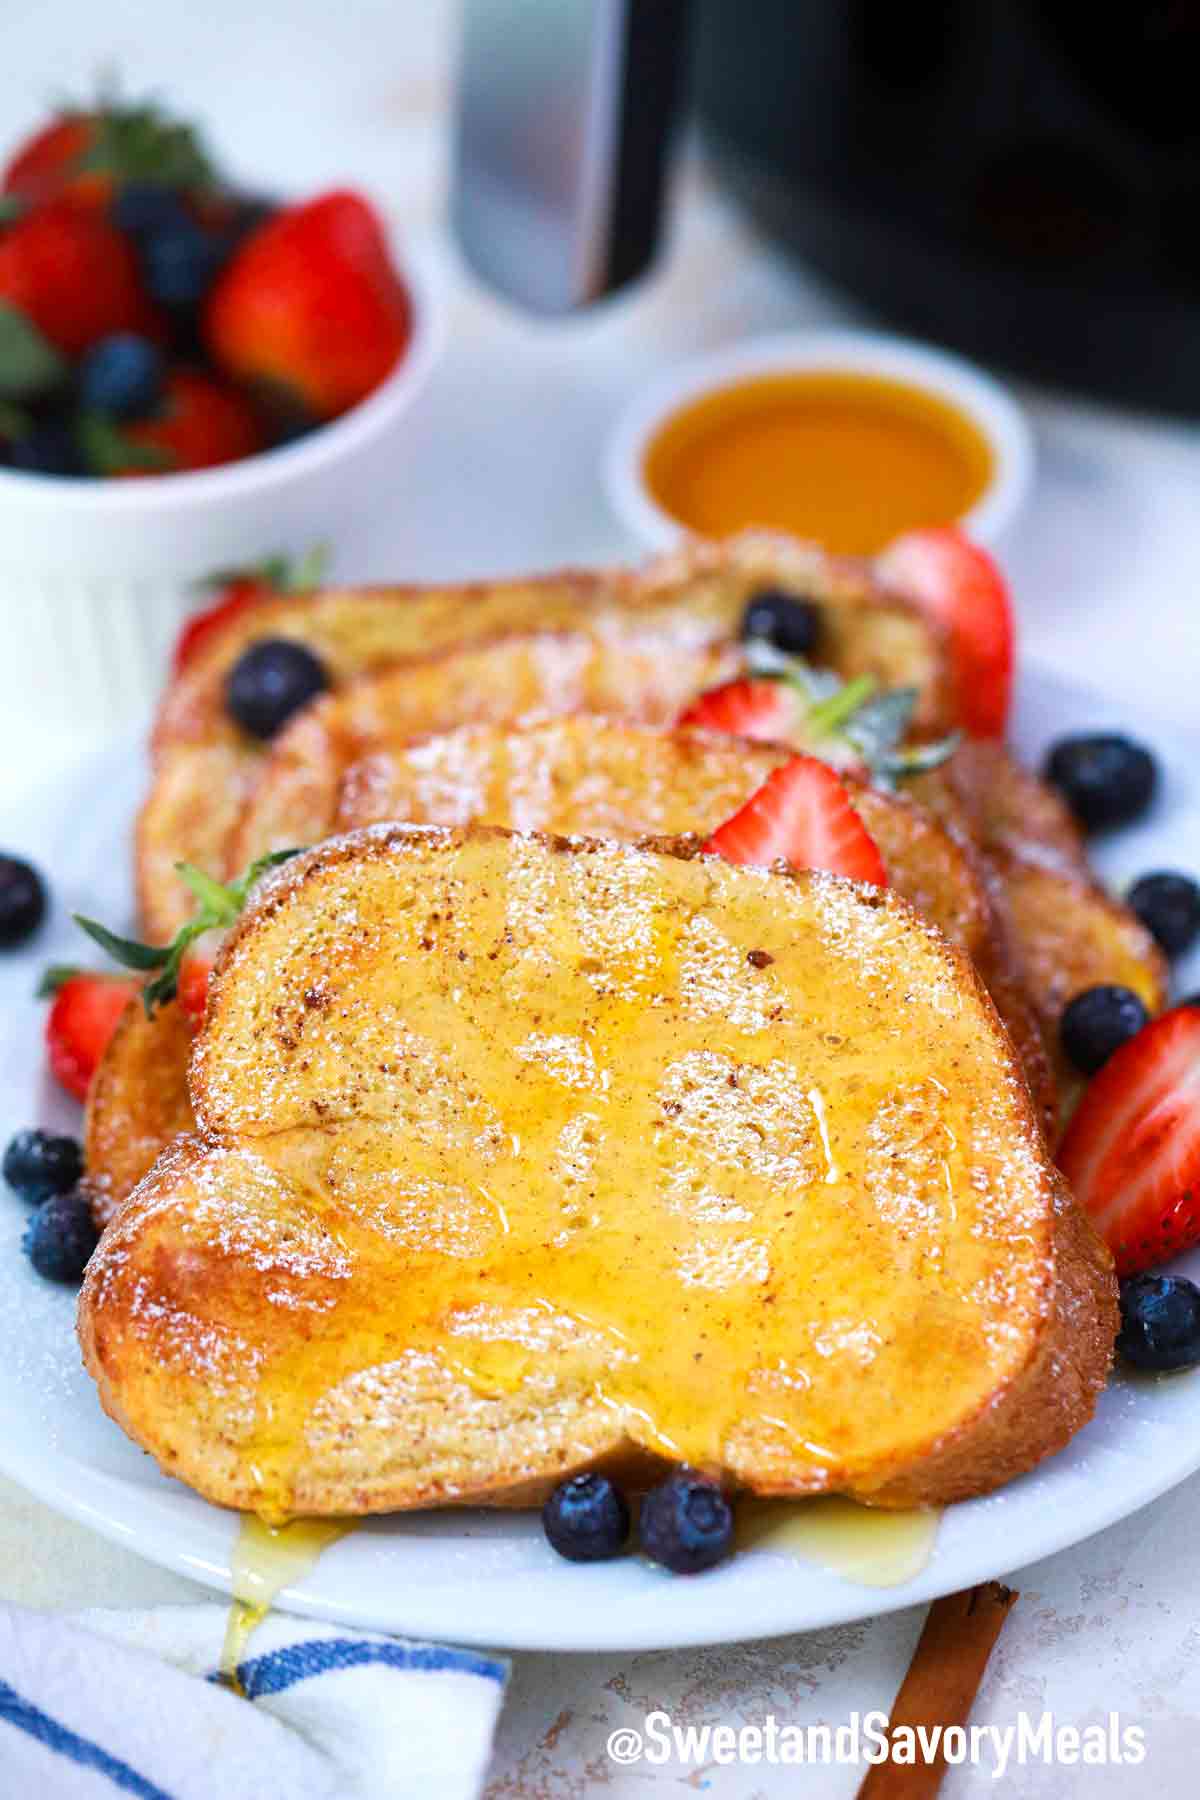 Indulgent French Toast - The Blonde Chef